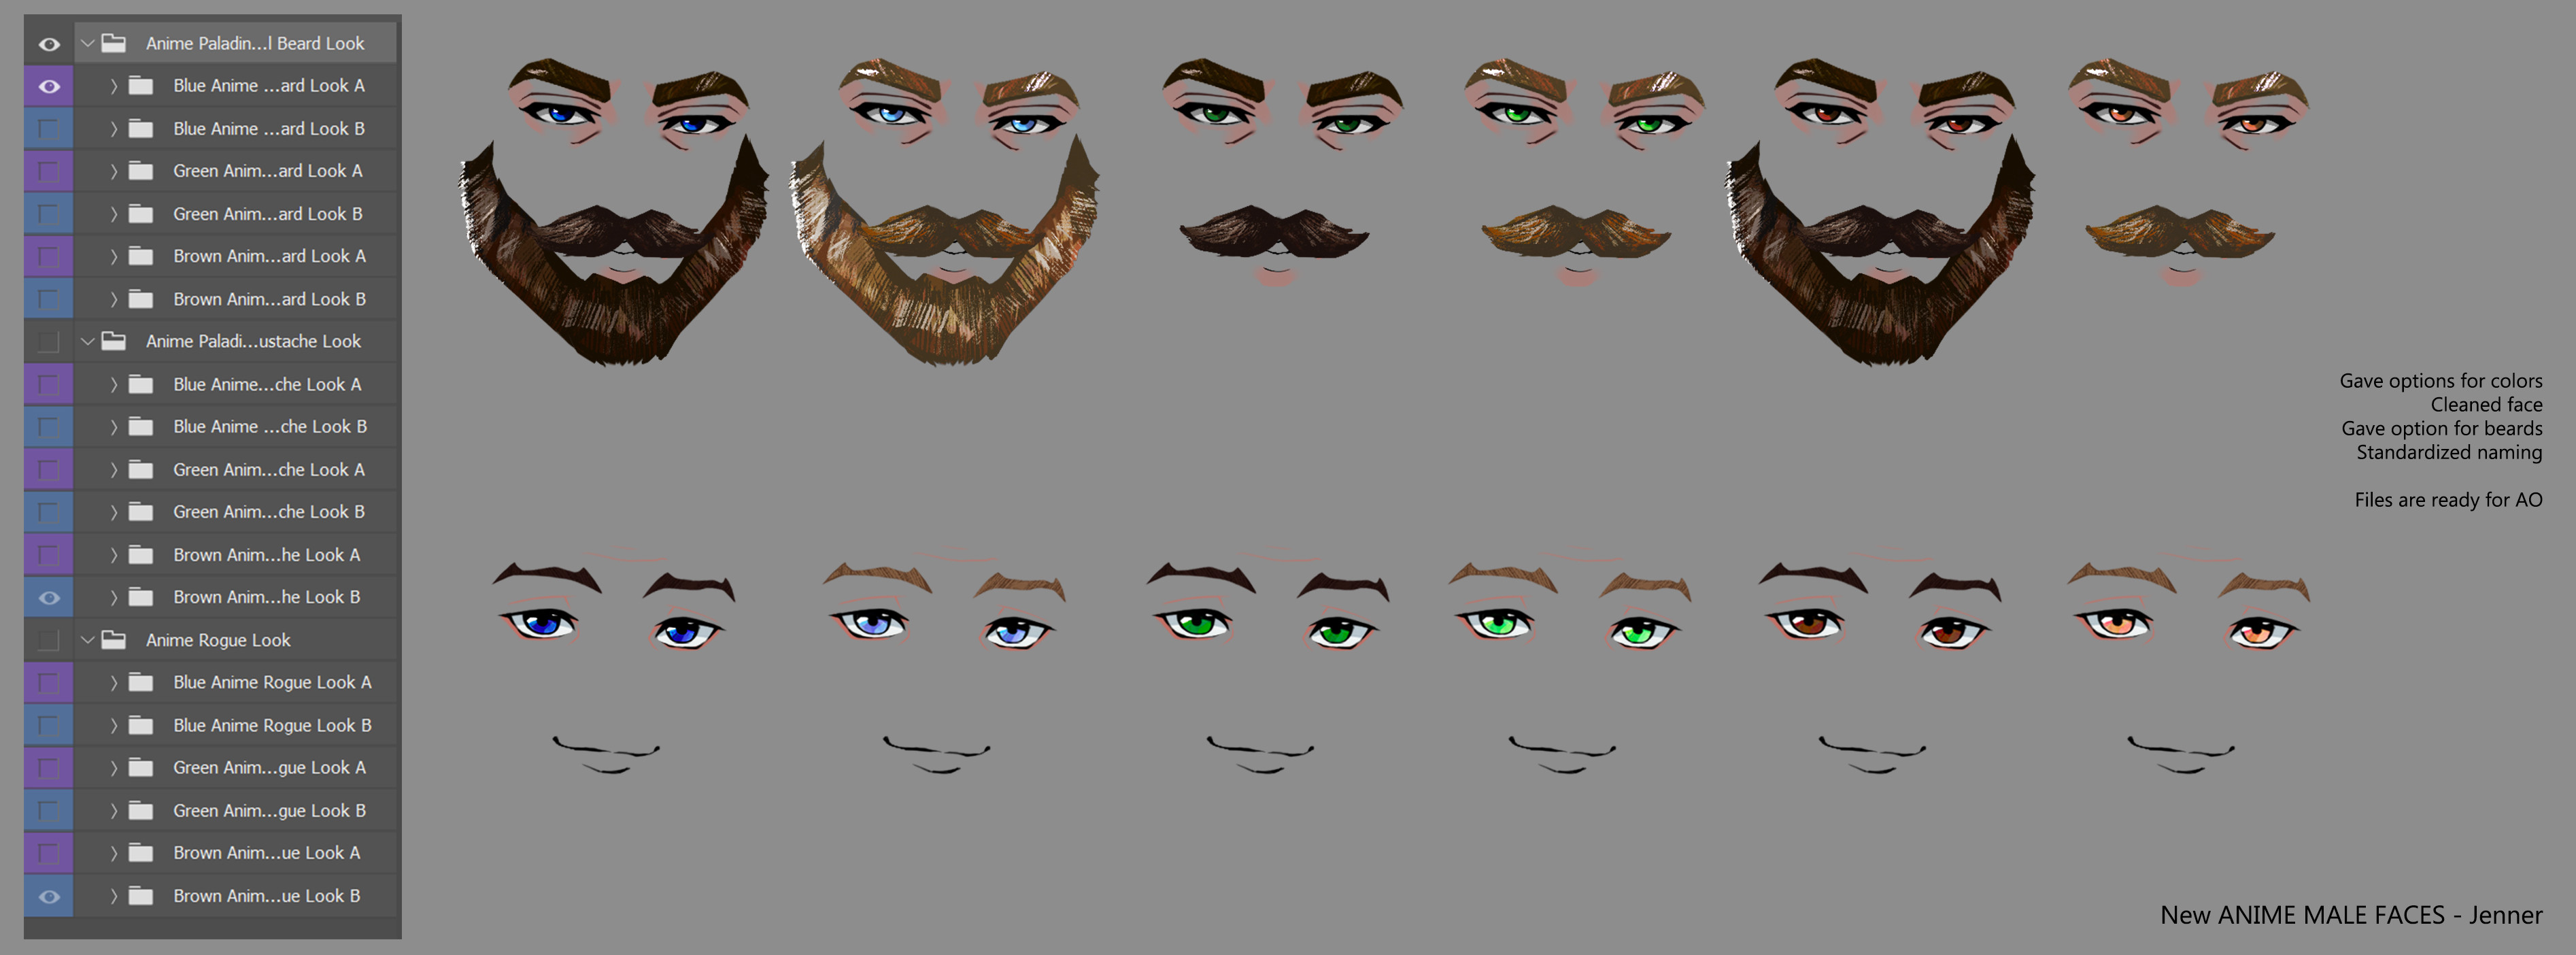 Example of faces with color options